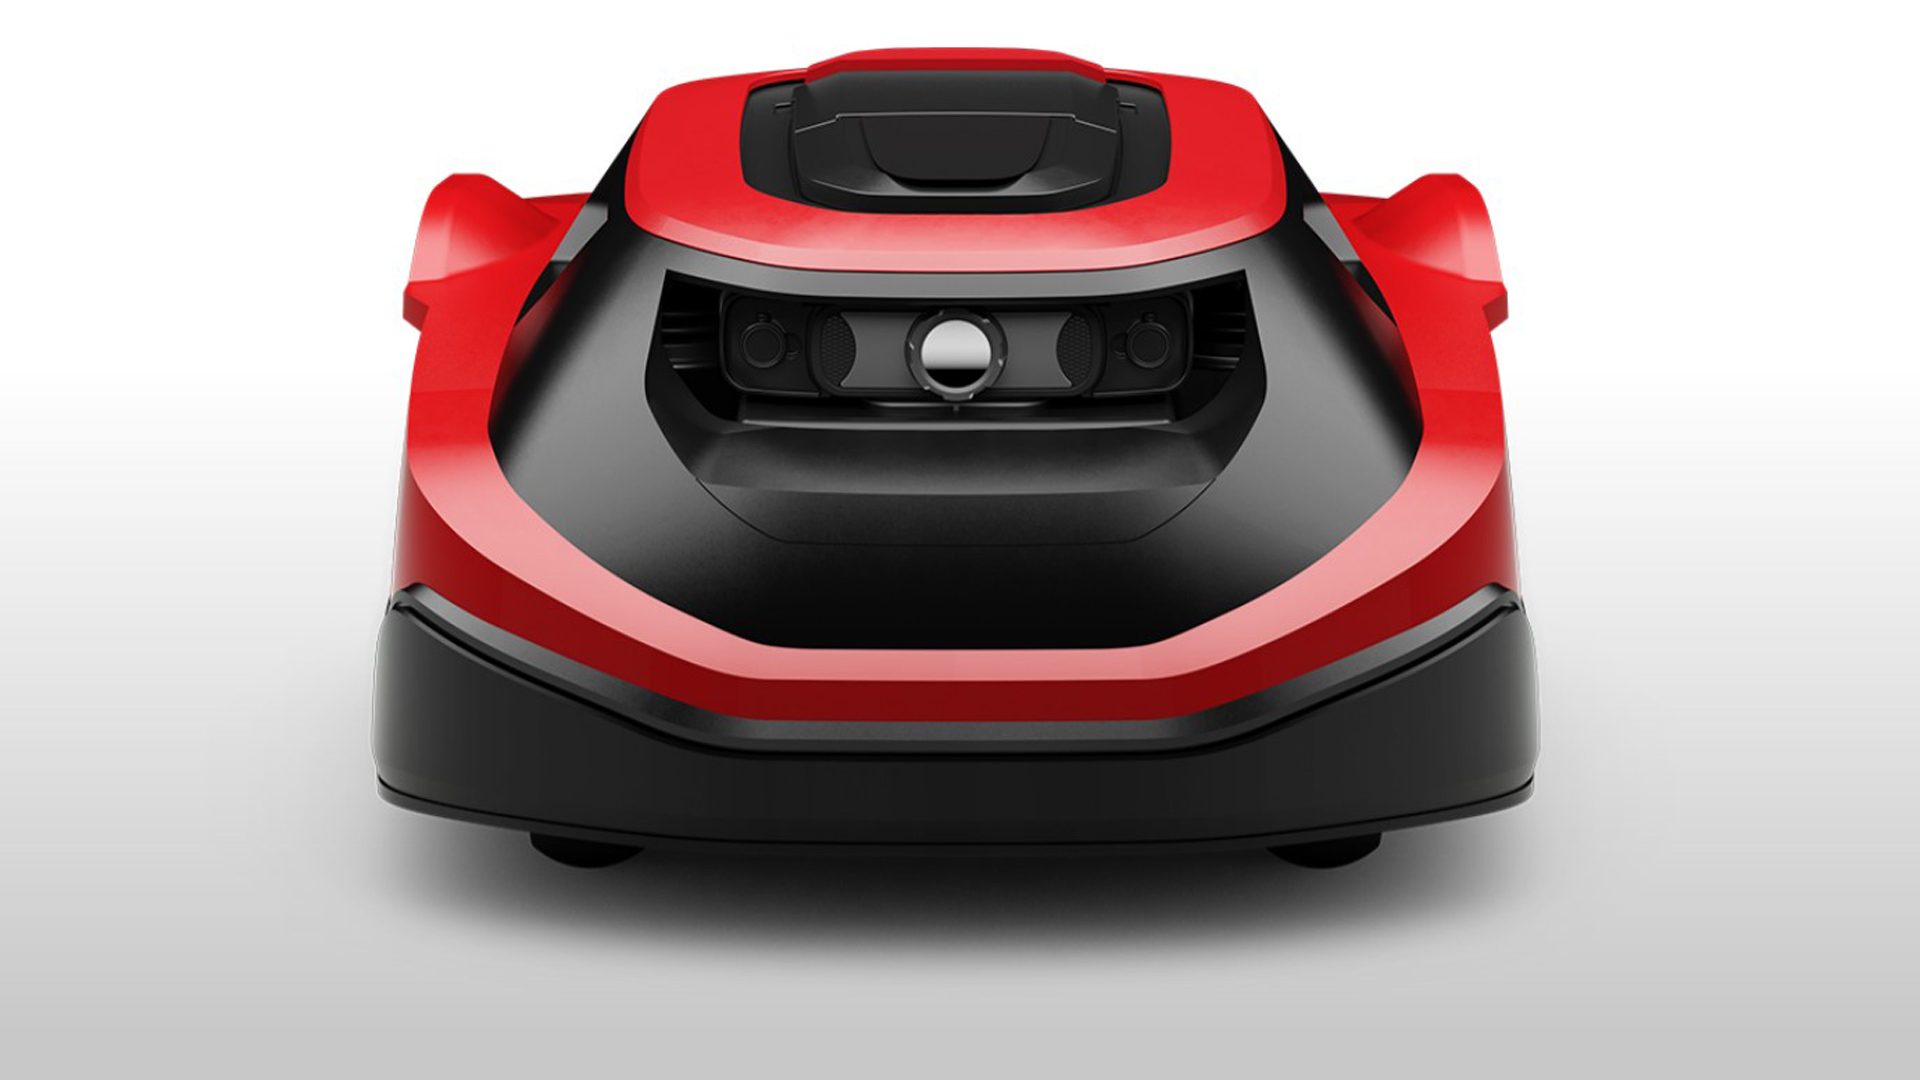 Toro's robotic lawn mower uses multiple cameras to navigate your yards